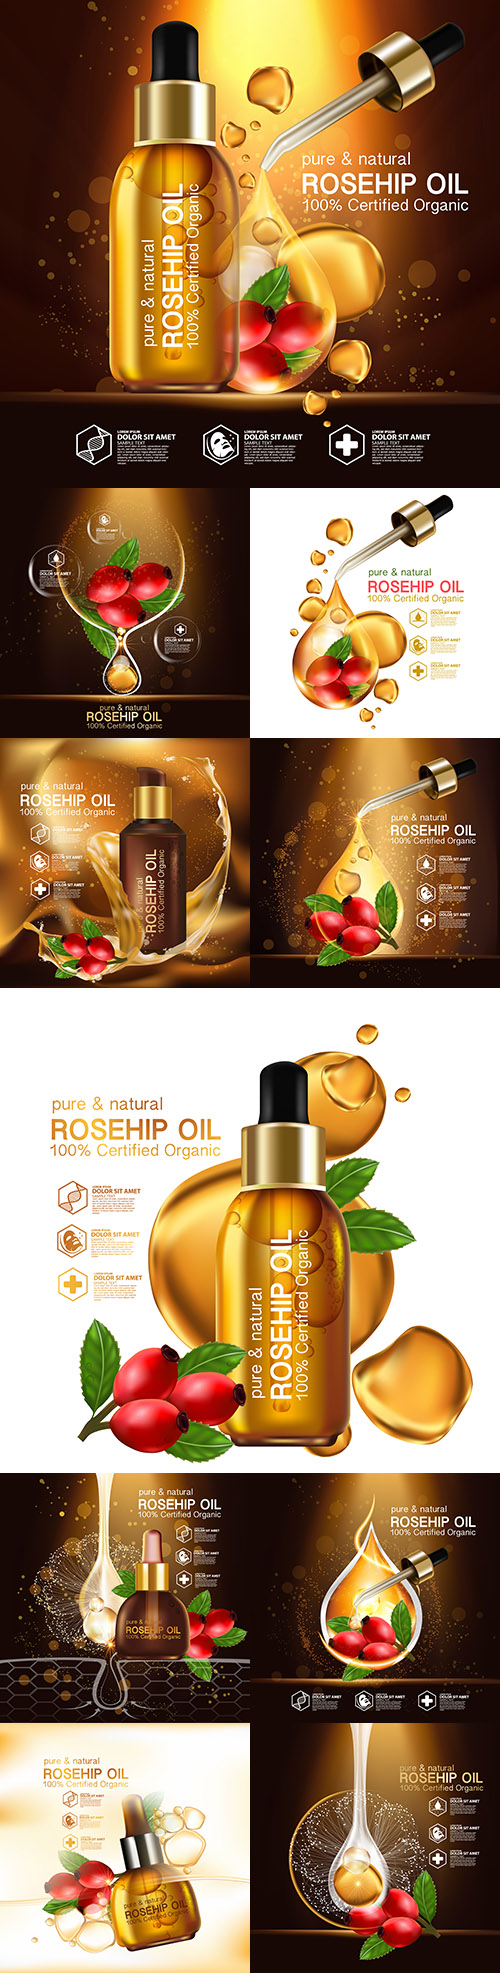 Rosehip Oil cosmetics for skin care Realistic Illustration